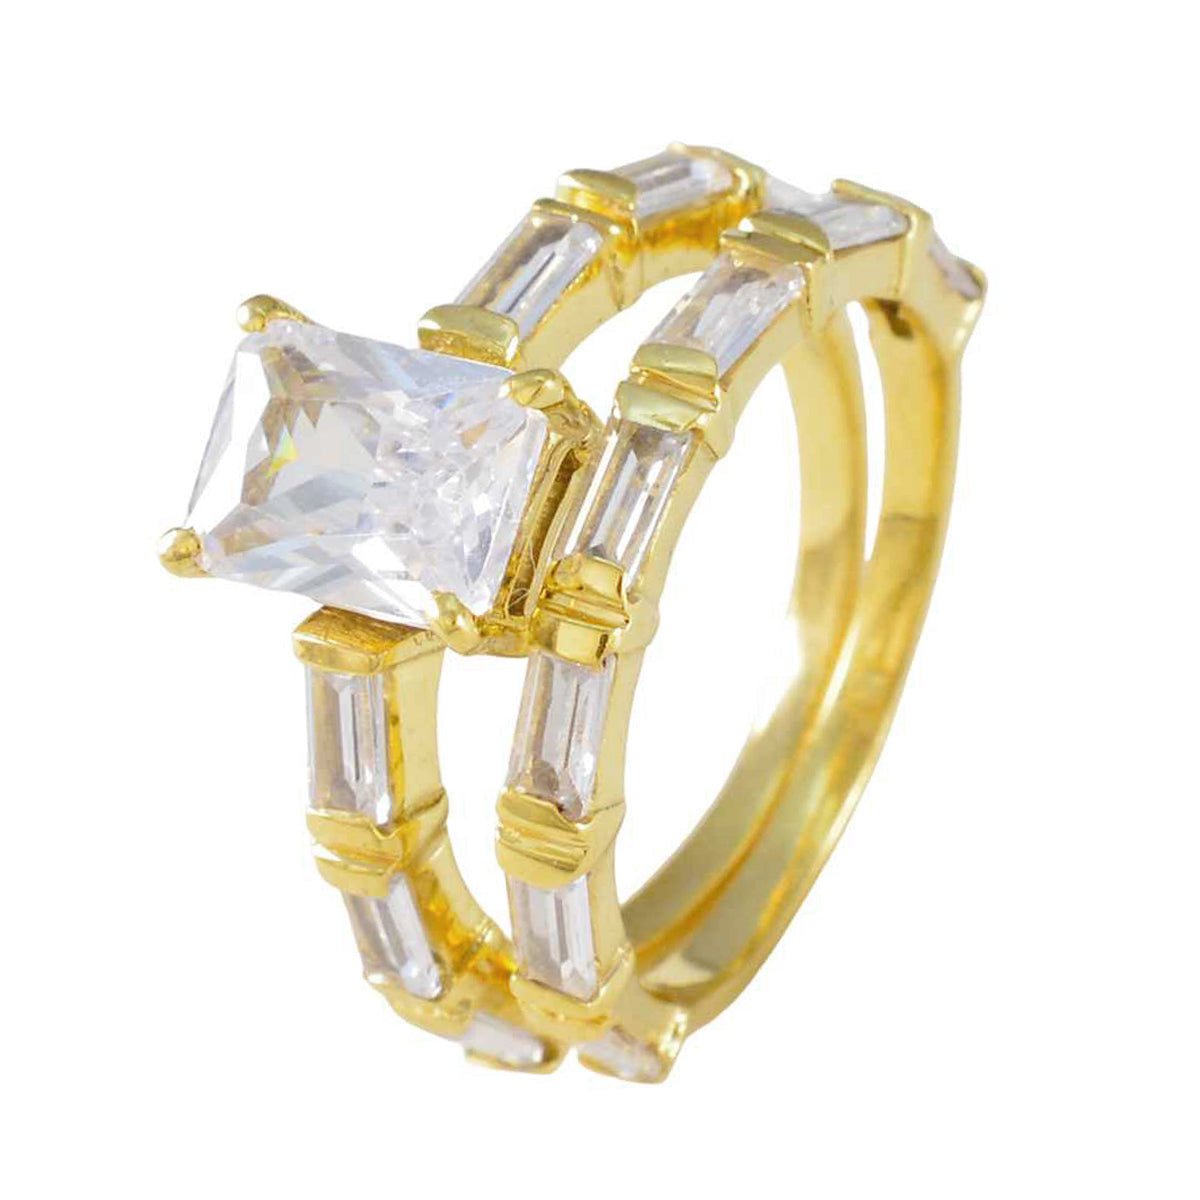 Riyo Large-Scale Silver Ring With Yellow Gold Plating White CZ Stone Octagon Shape Prong Setting Ring